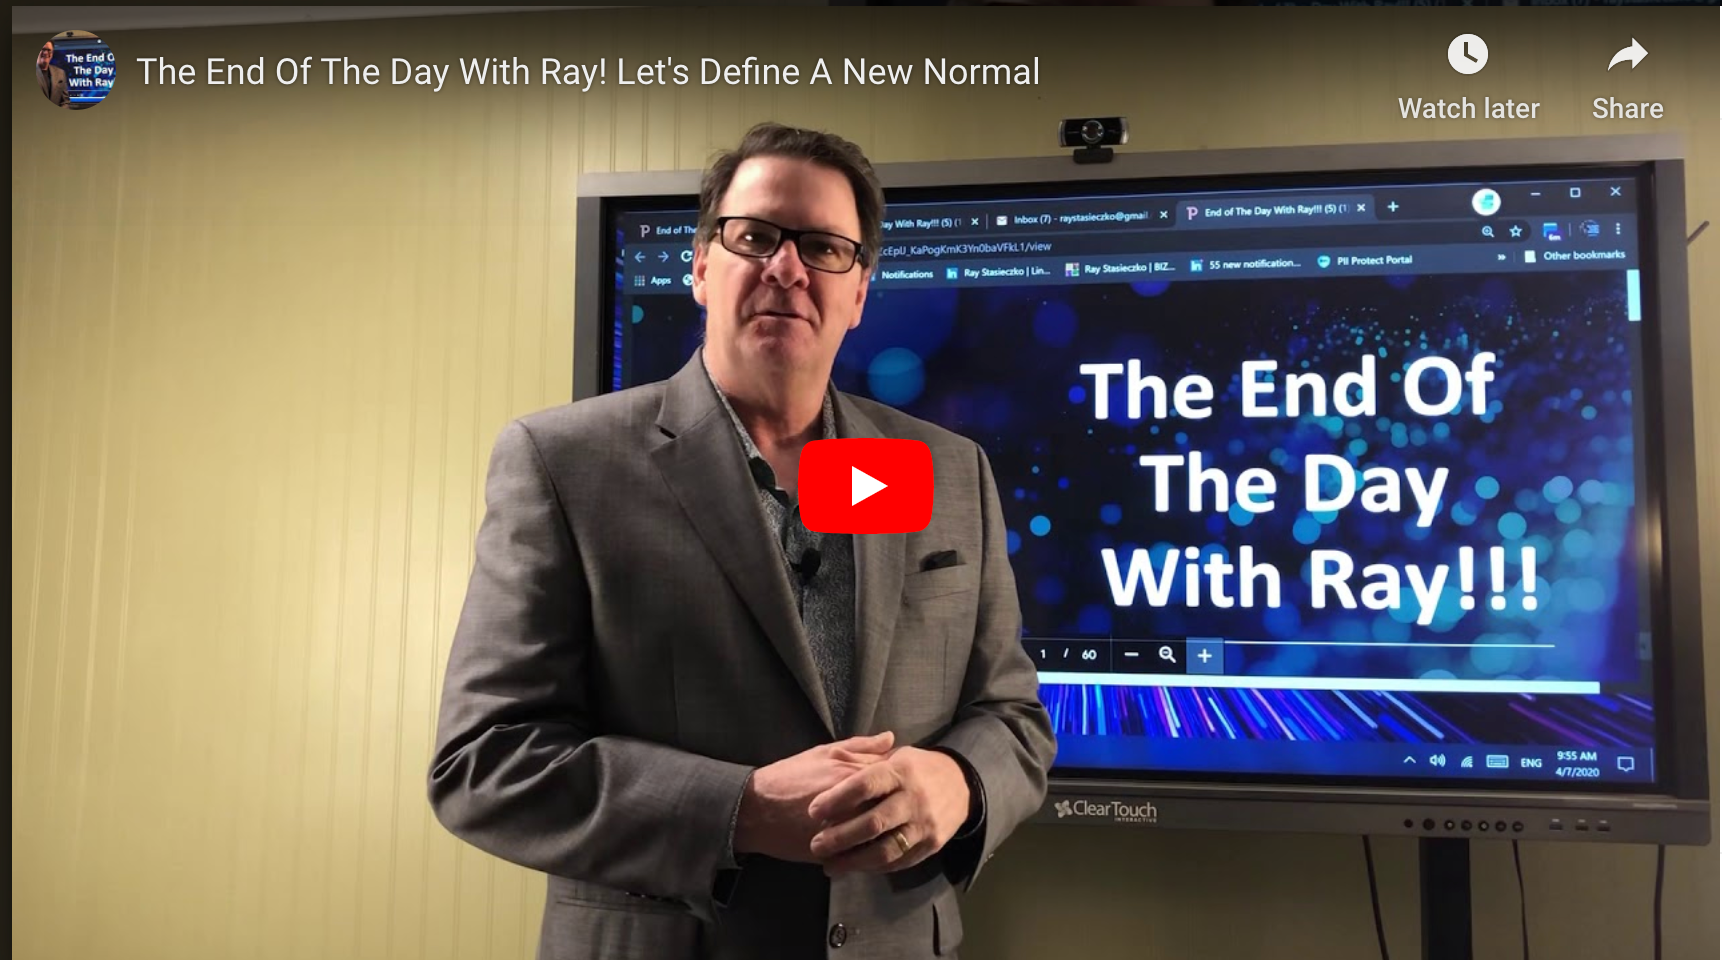 The End Of The Day With Ray! Let's Define A New Normal